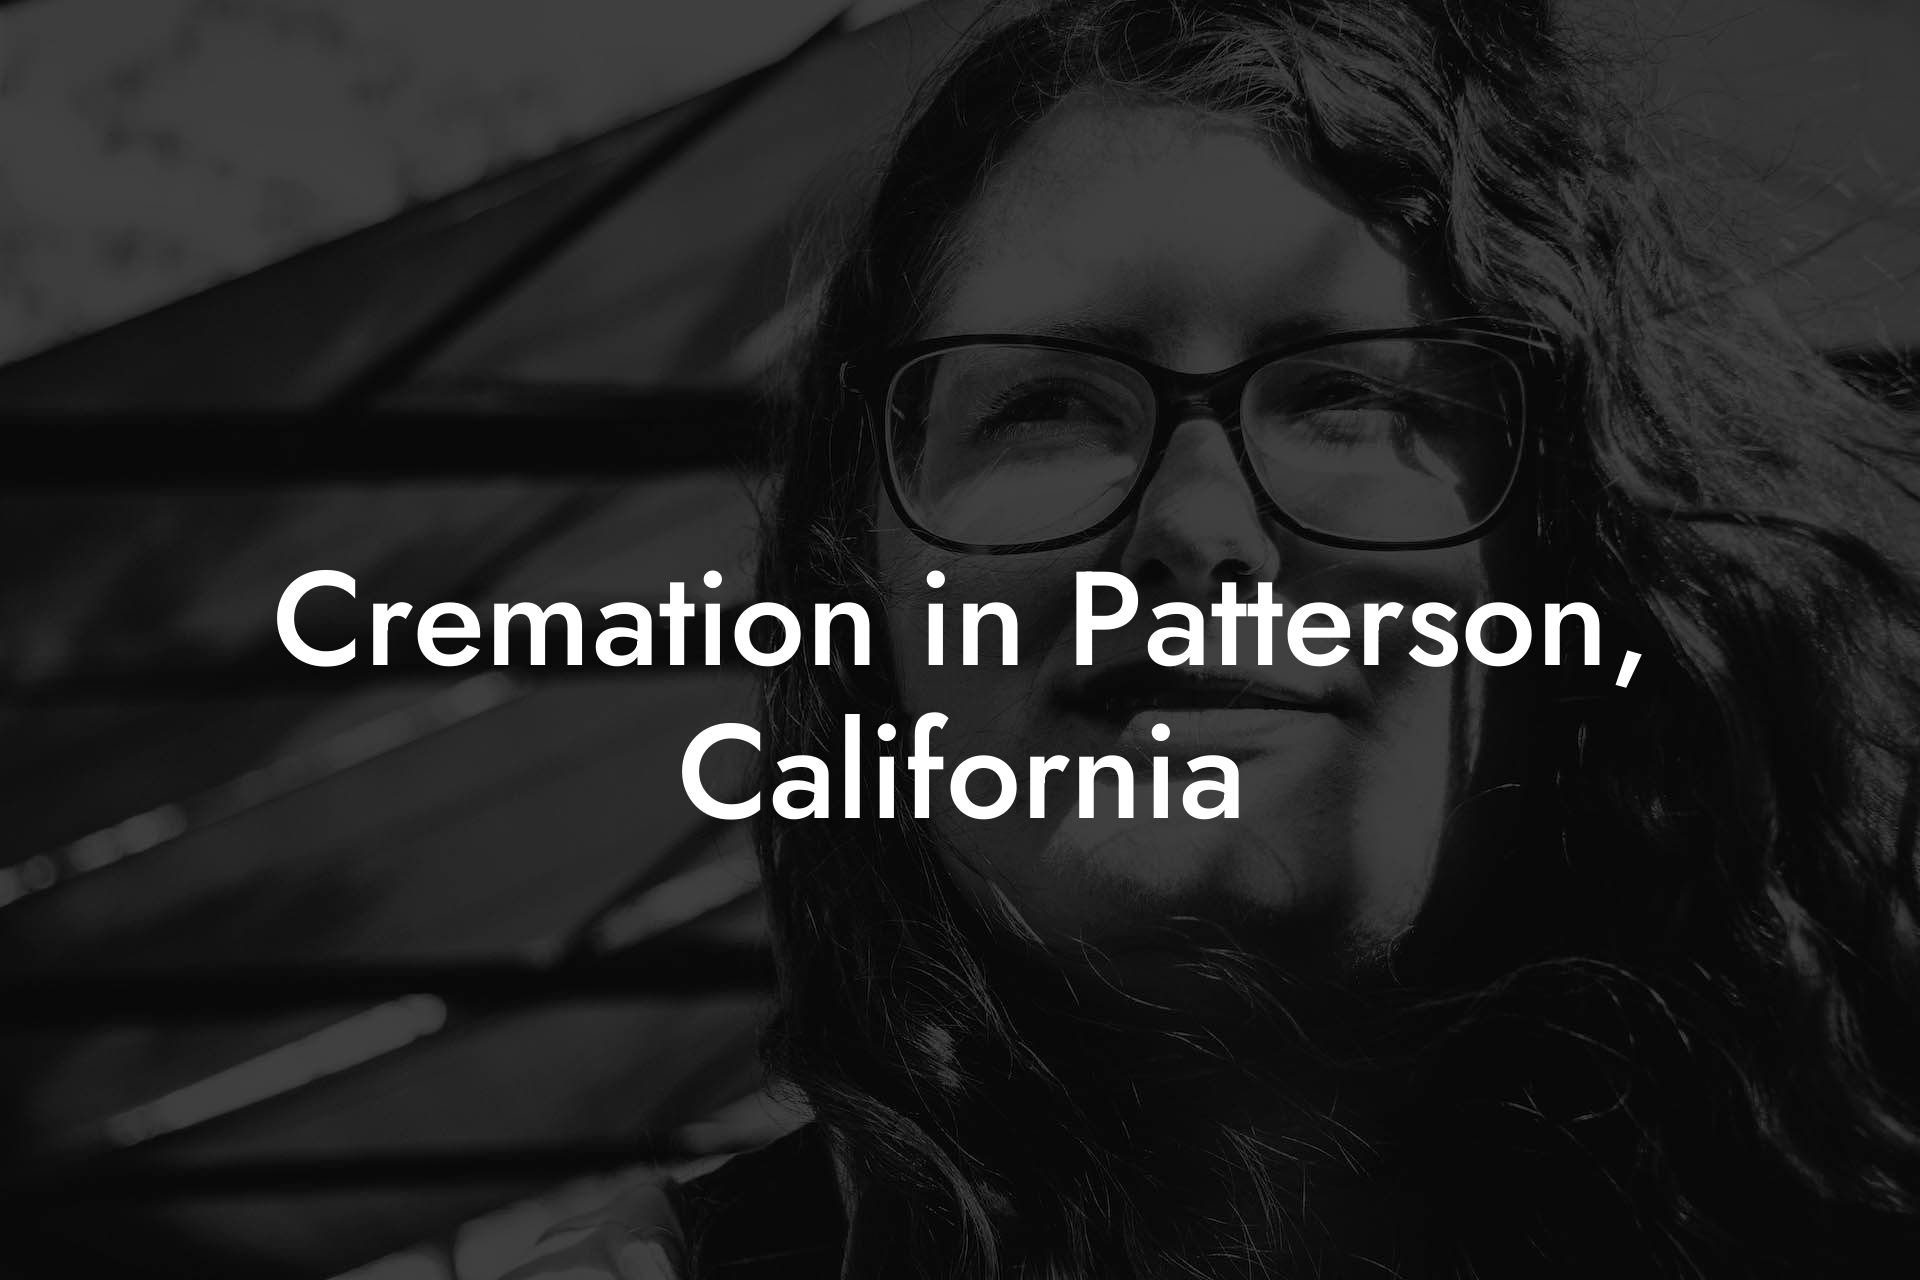 Cremation in Patterson, California